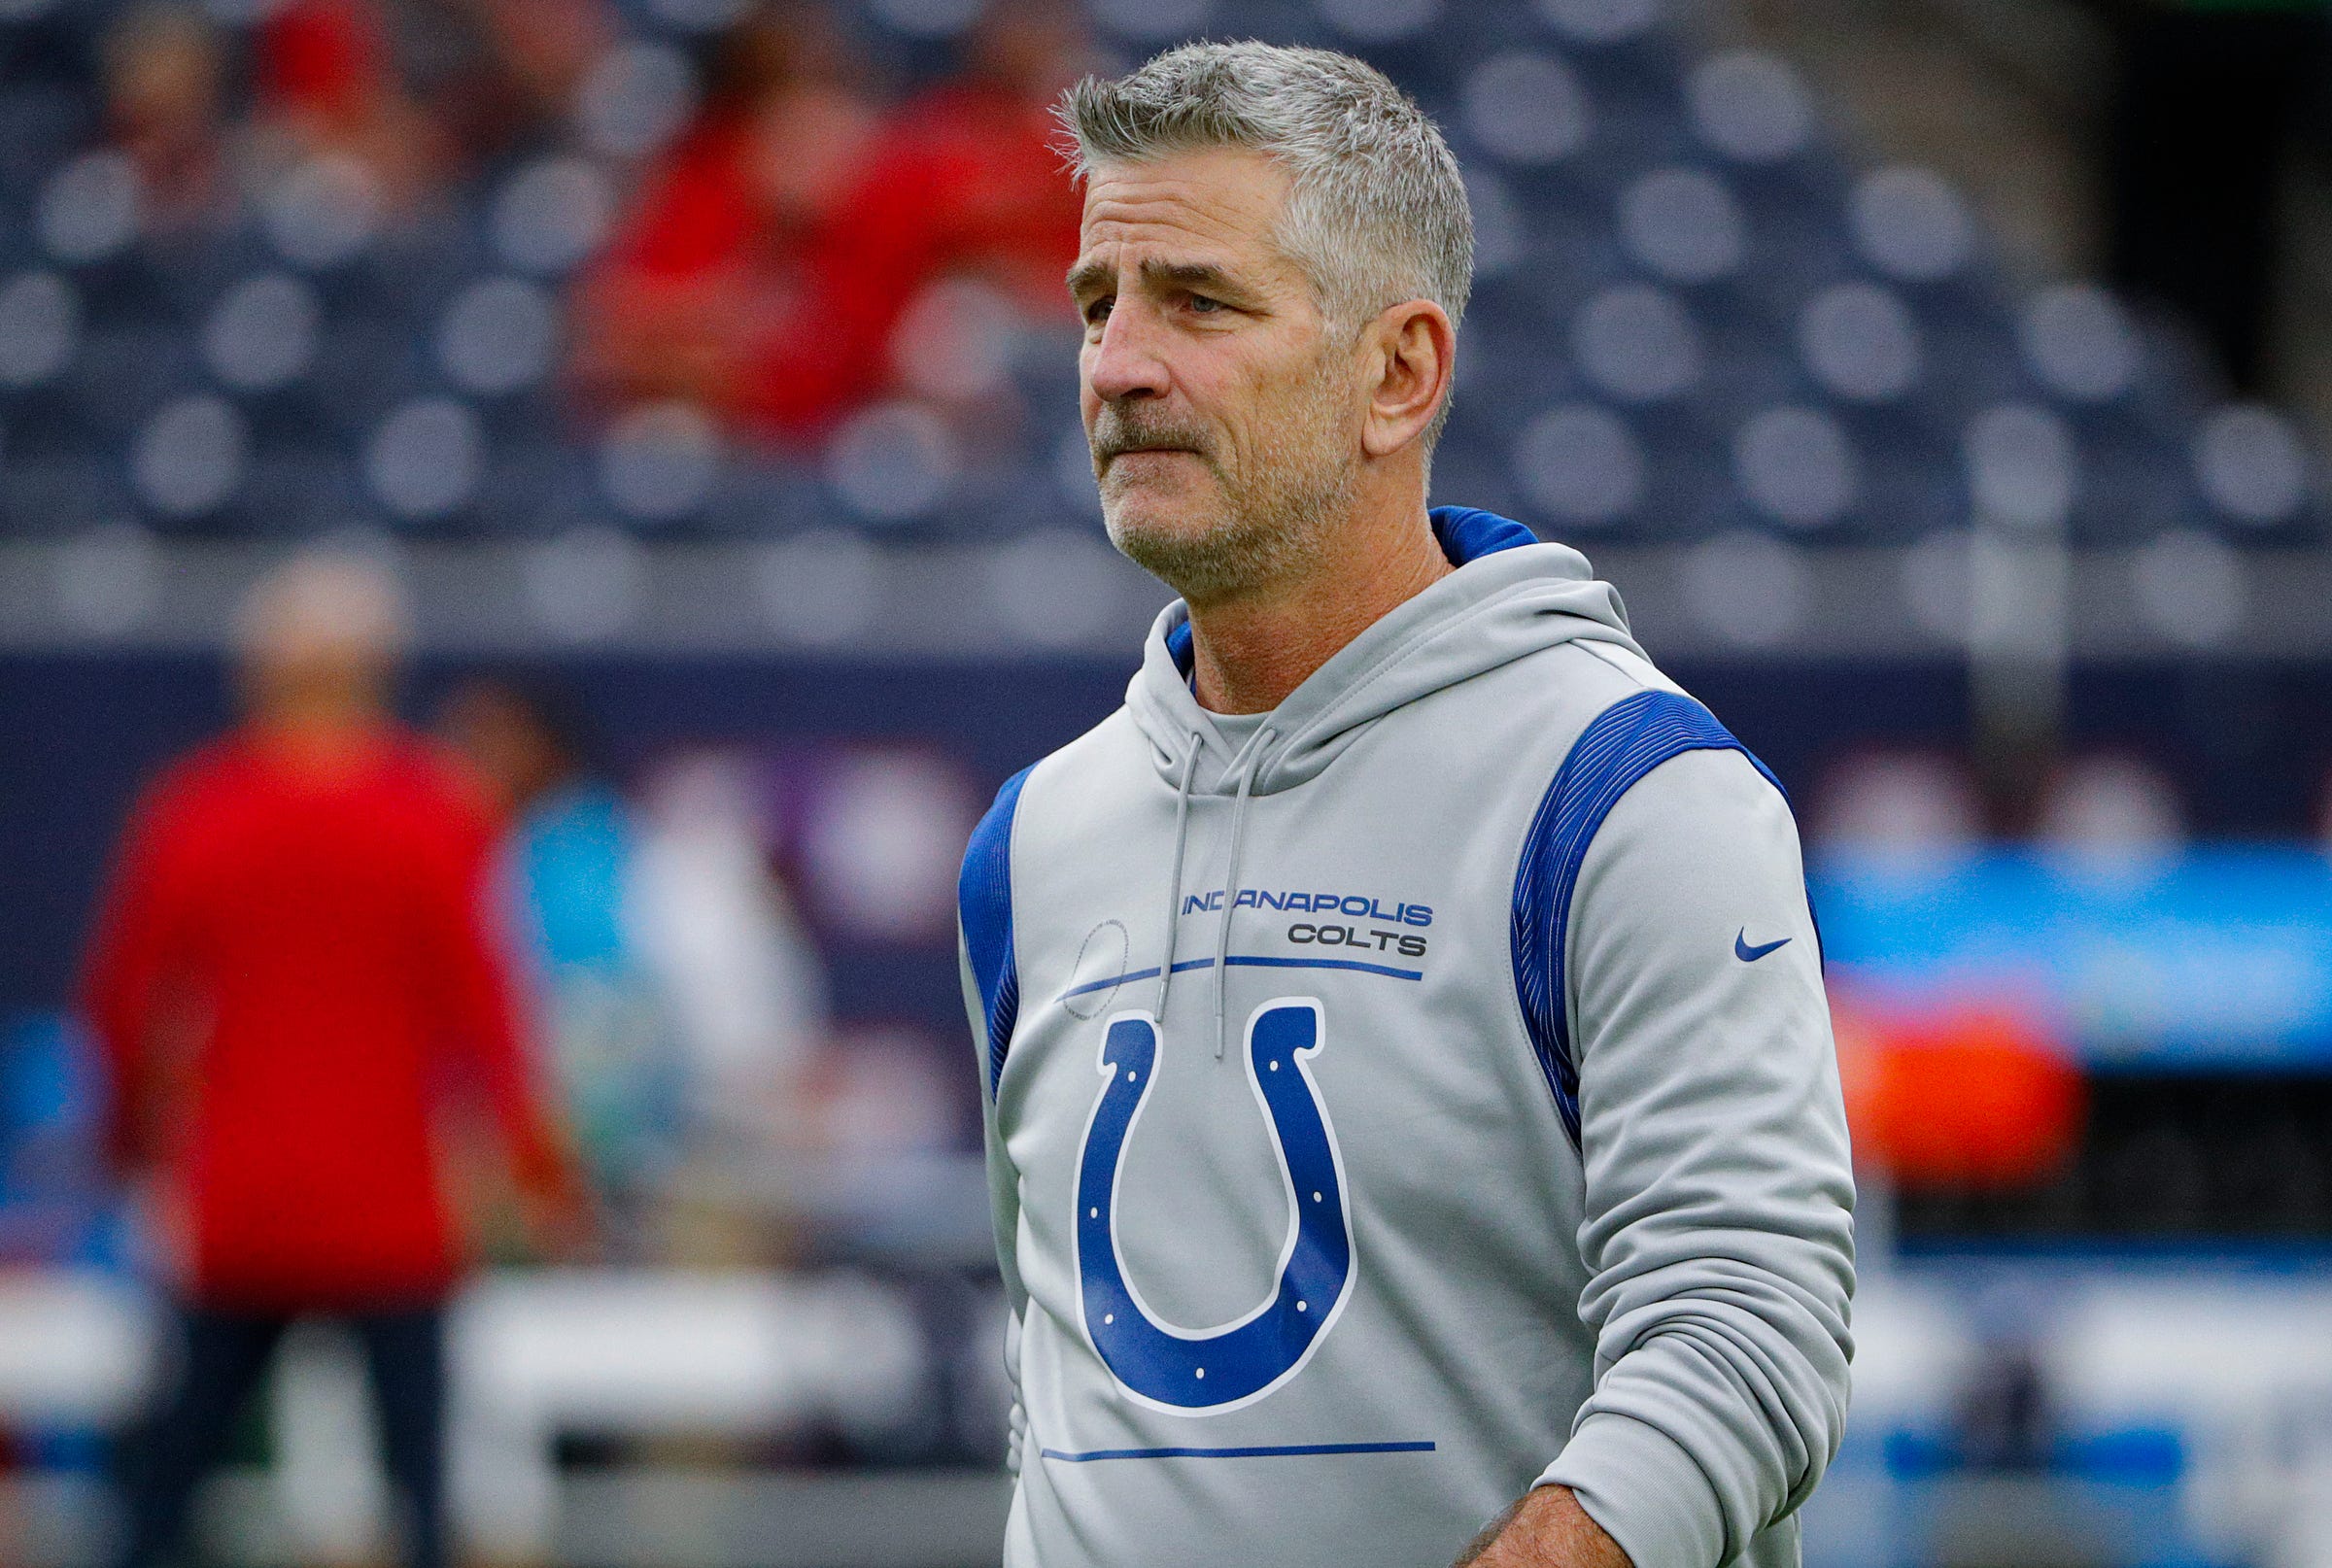 Carolina Panthers pick Frank Reich to be next head coach